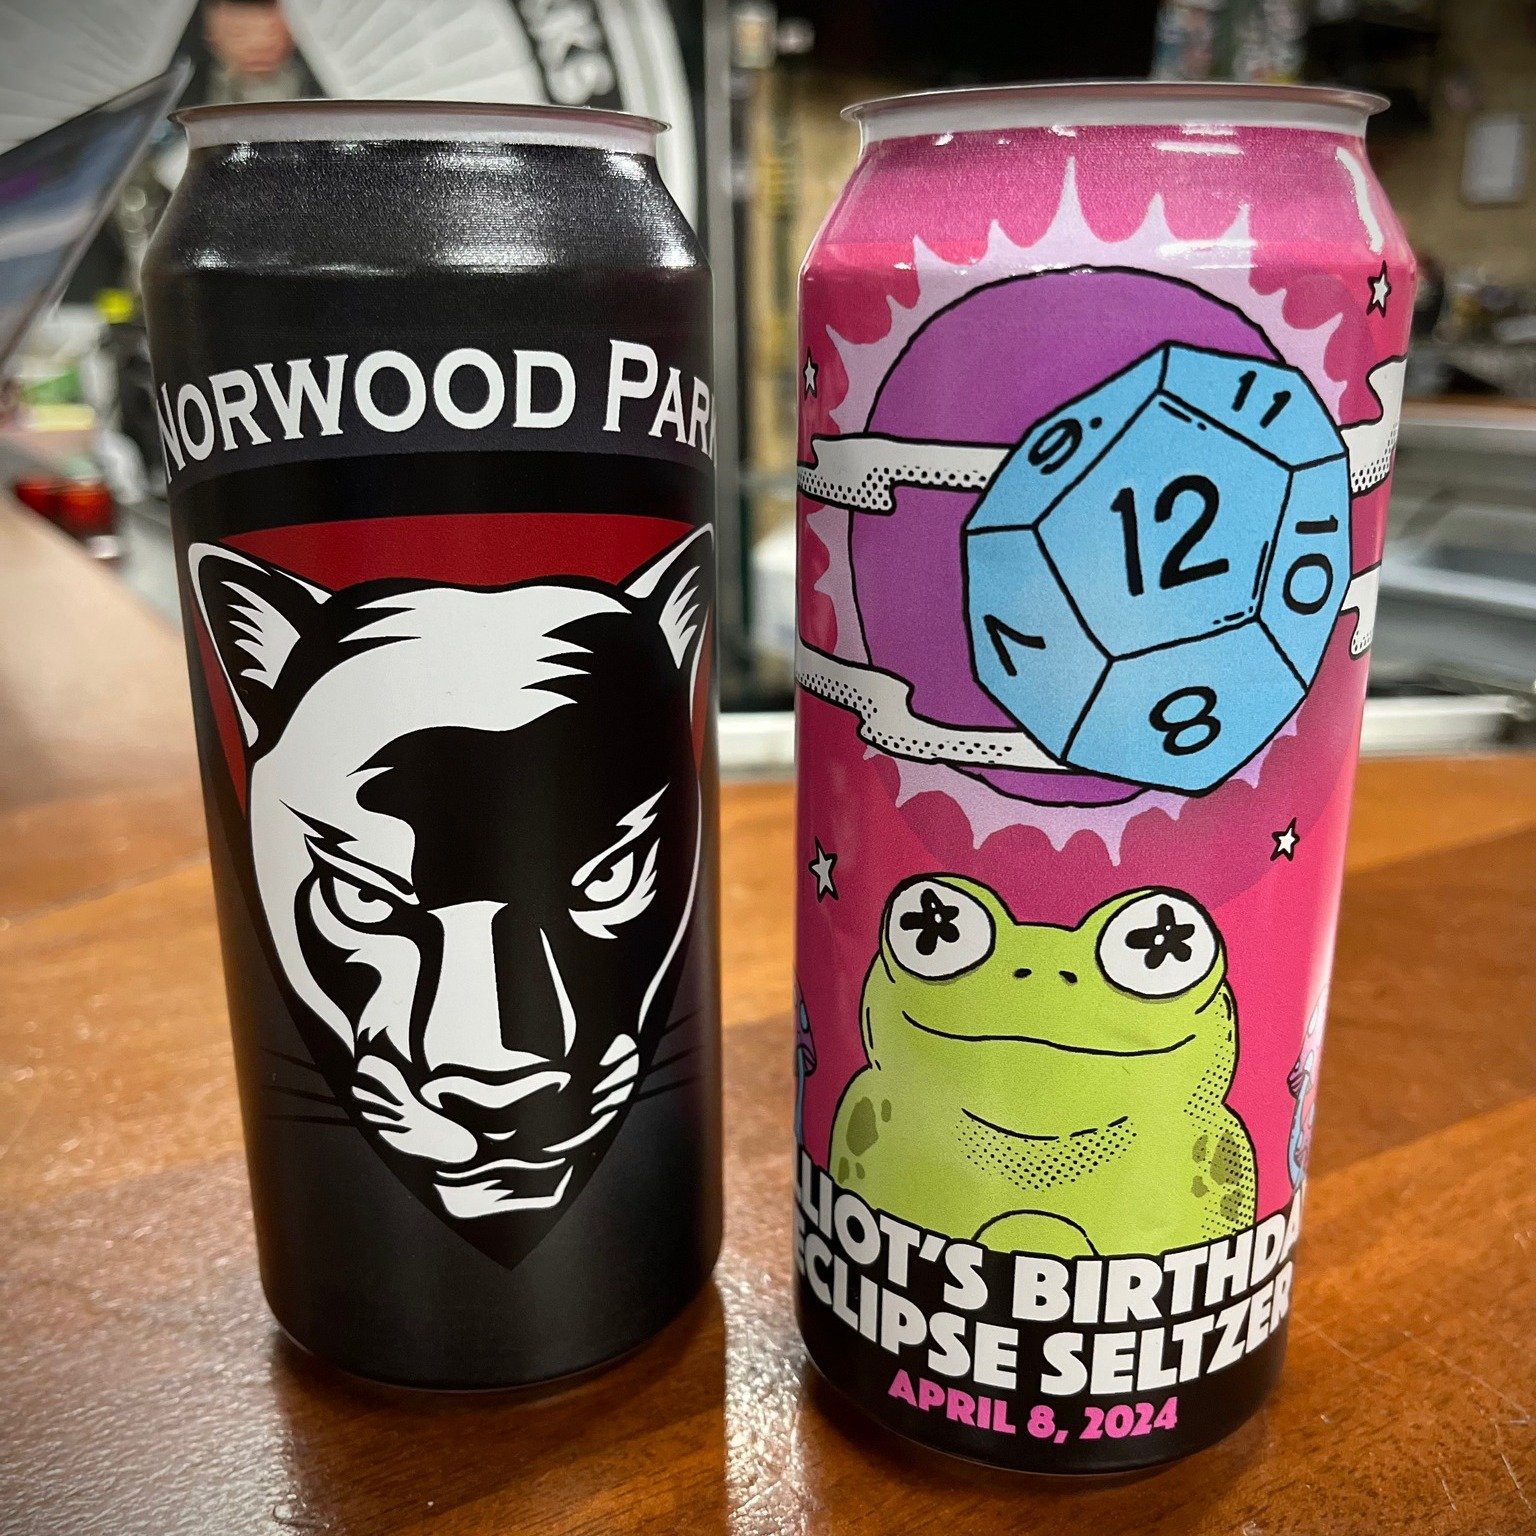 We're packaging 2 custom cans today: one for the Norwood Park PTO and the other for a very cool kid's 12th birthday.

We're going to start offering this service for folks going forward. We'll get a website and whatnot put together here shortly, but, 